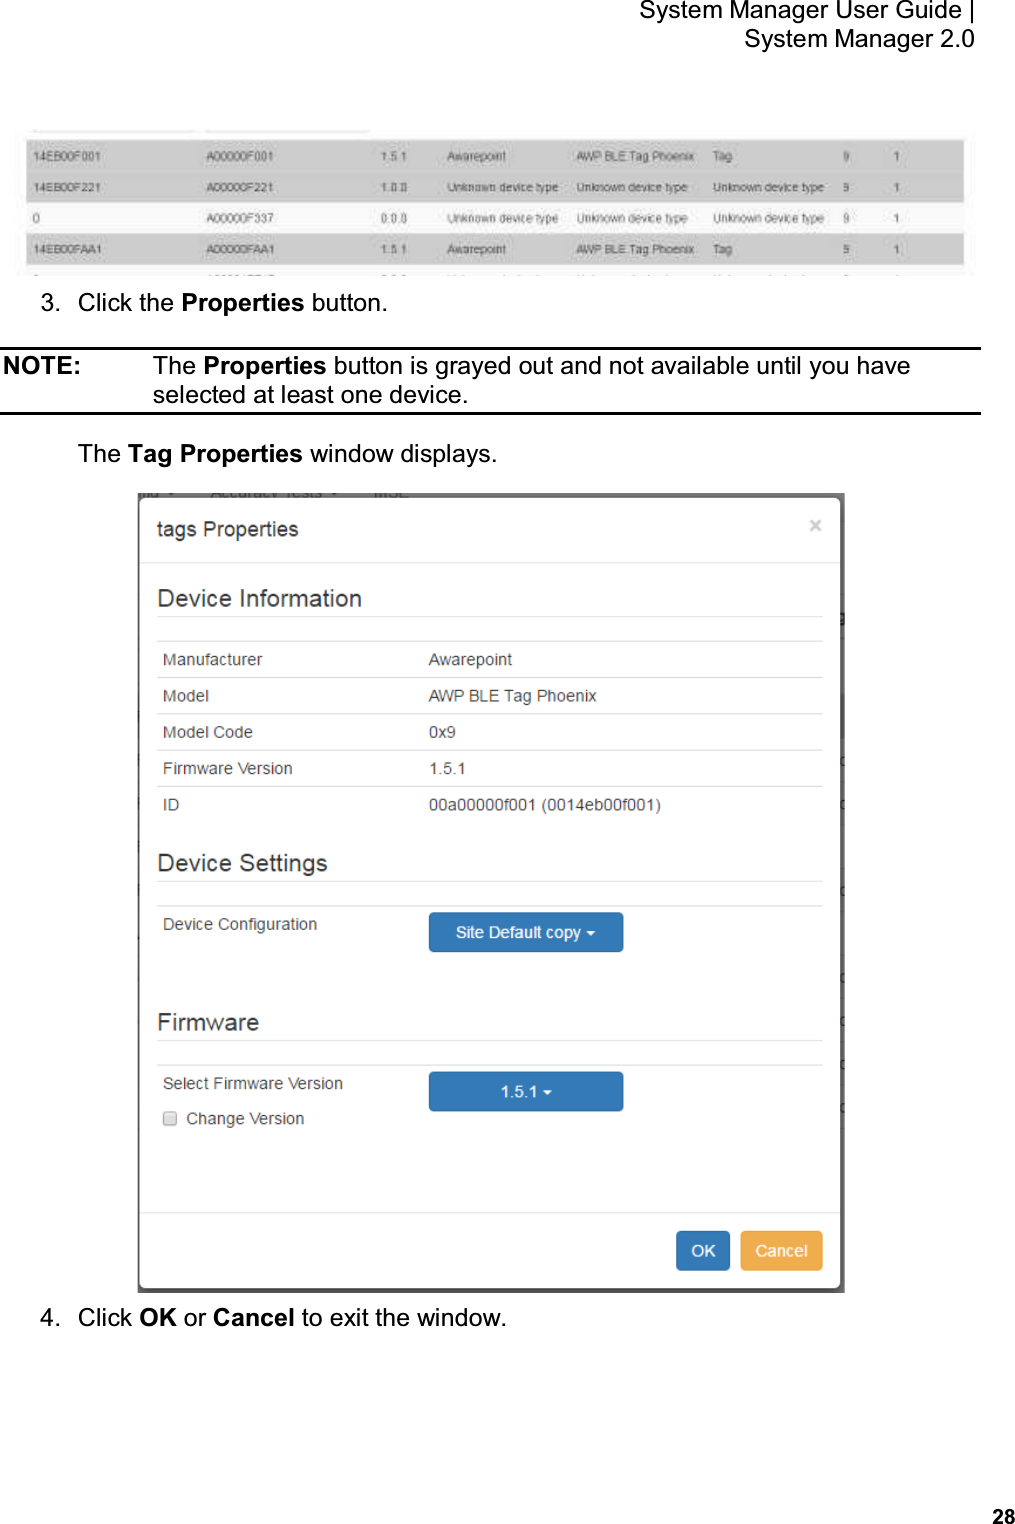           28 System Manager User Guide |  System Manager 2.0  3.  Click the Properties button. NOTE:    The Properties button is grayed out and not available until you have selected at least one device. The Tag Properties window displays.  4.  Click OK or Cancel to exit the window. 